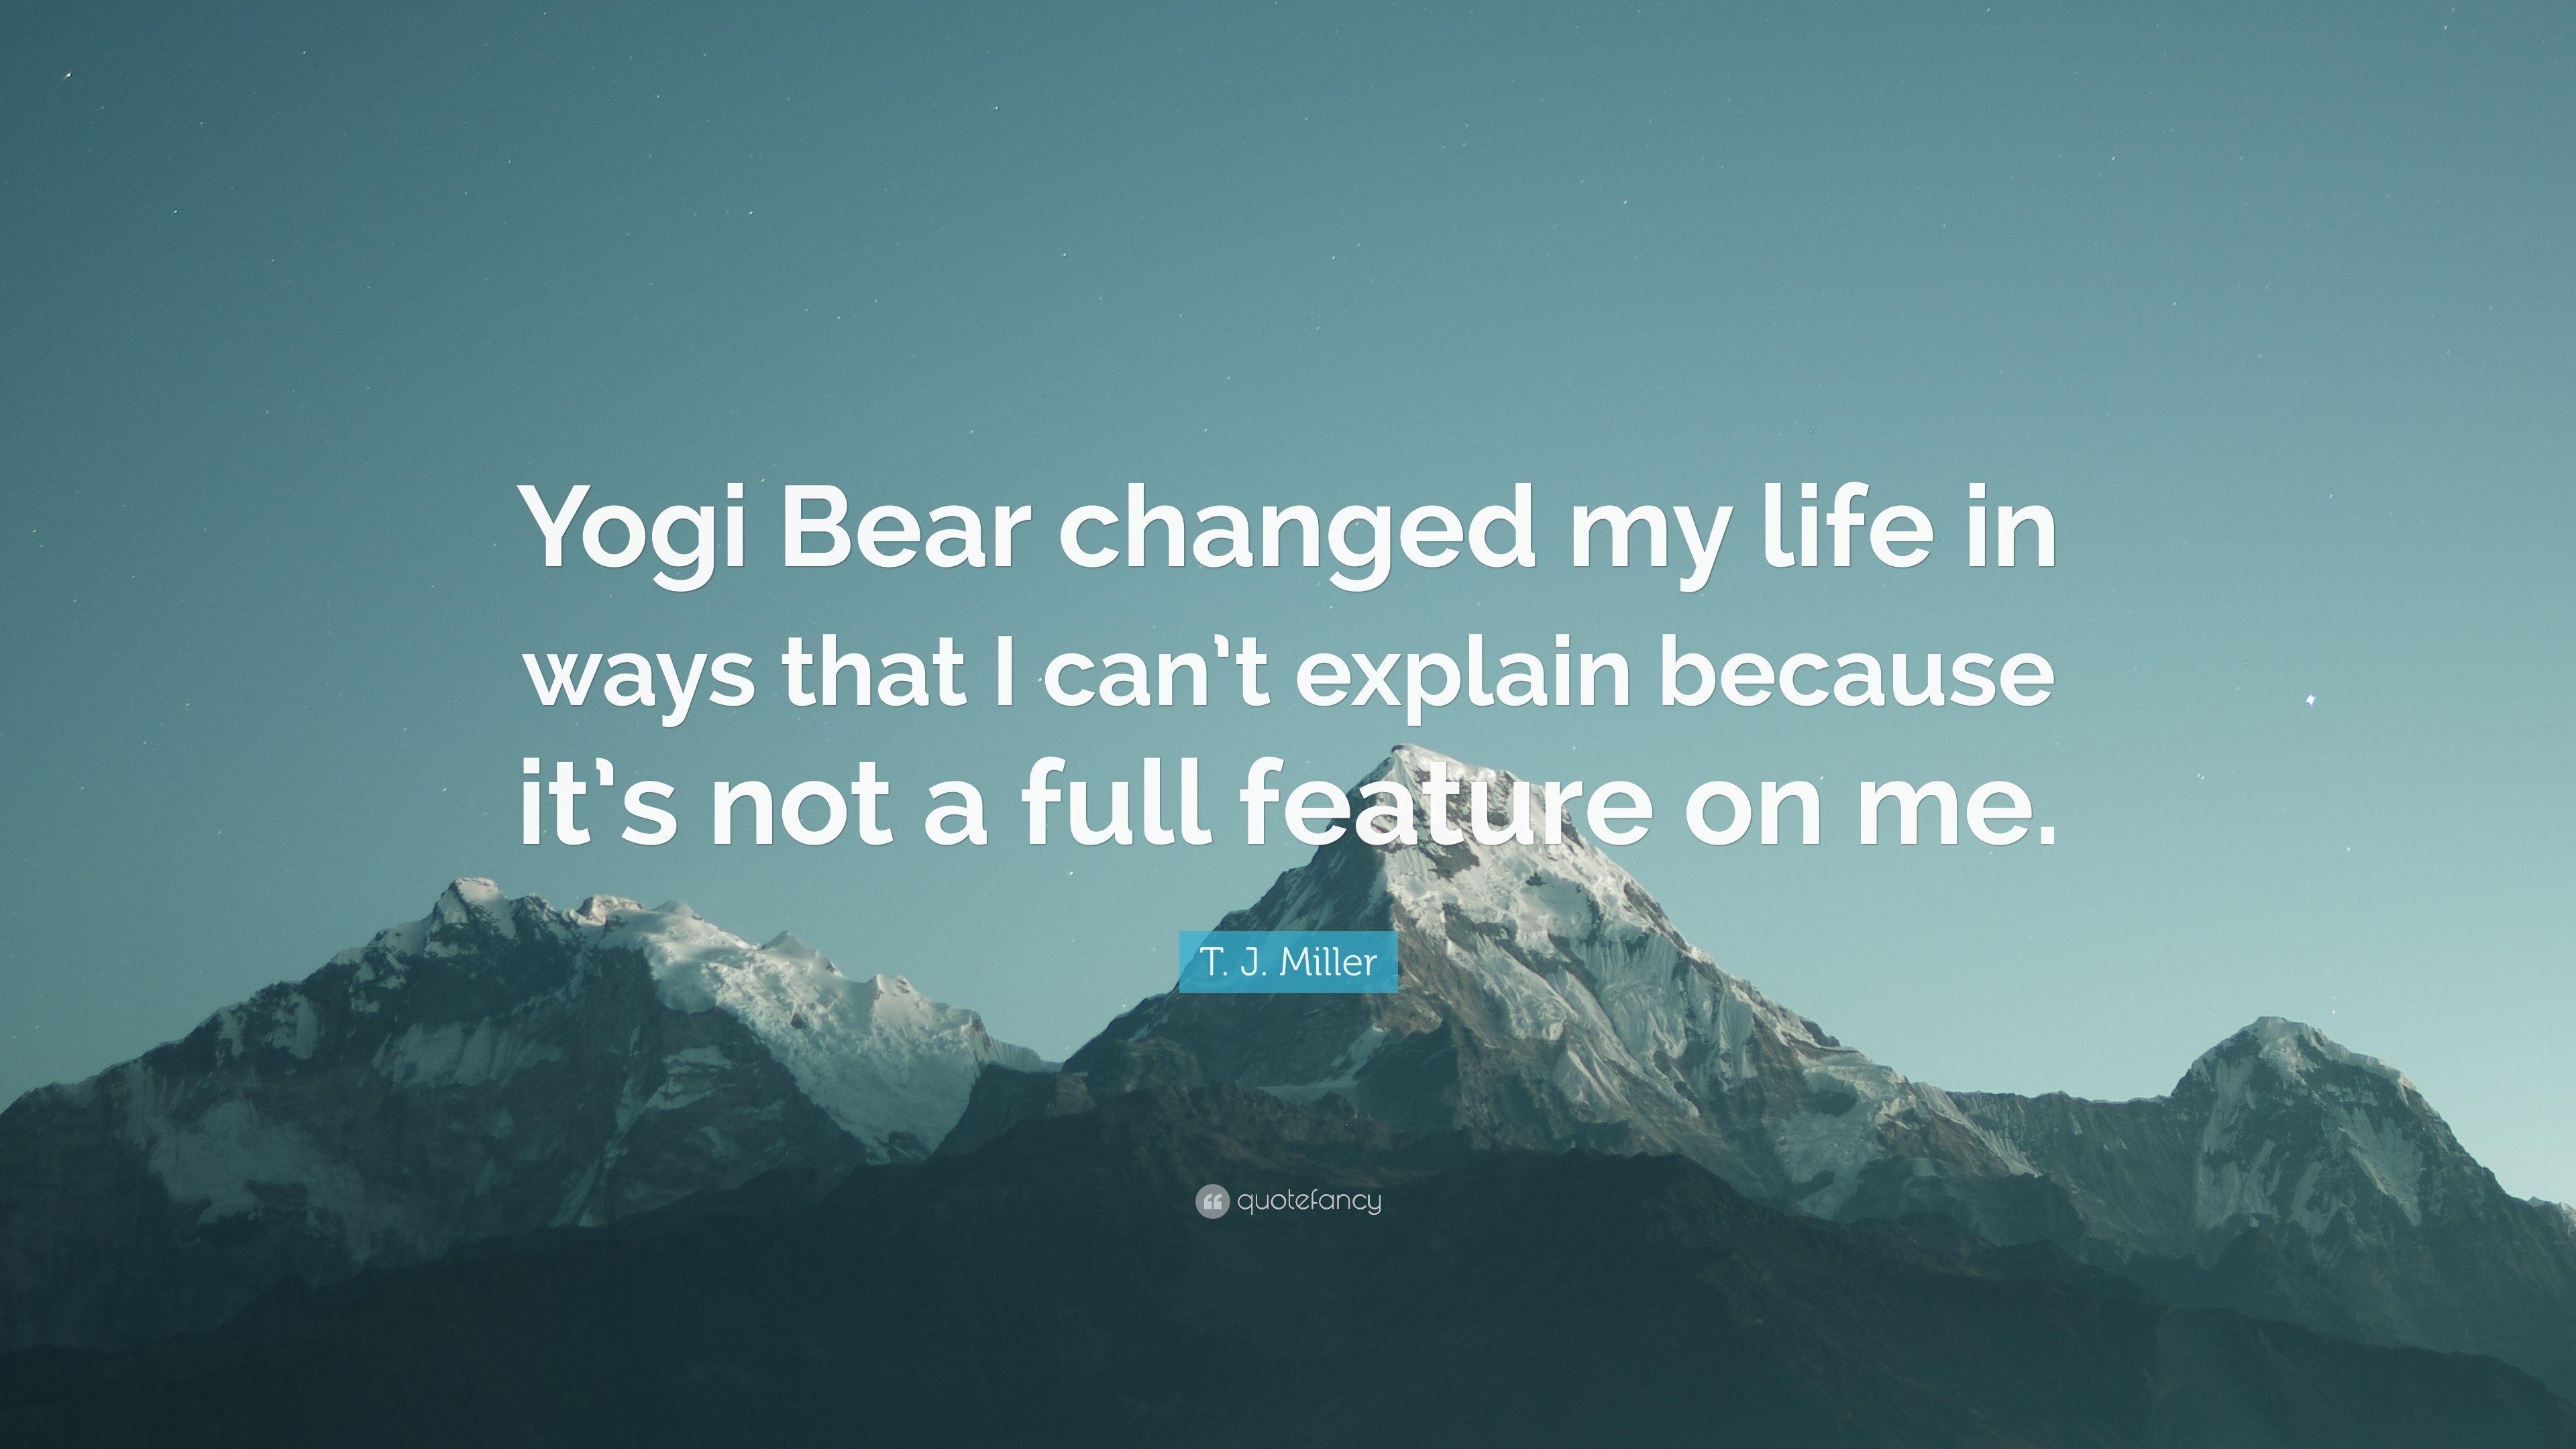 T. J. Miller Quote: “Yogi Bear changed my life in ways that I can